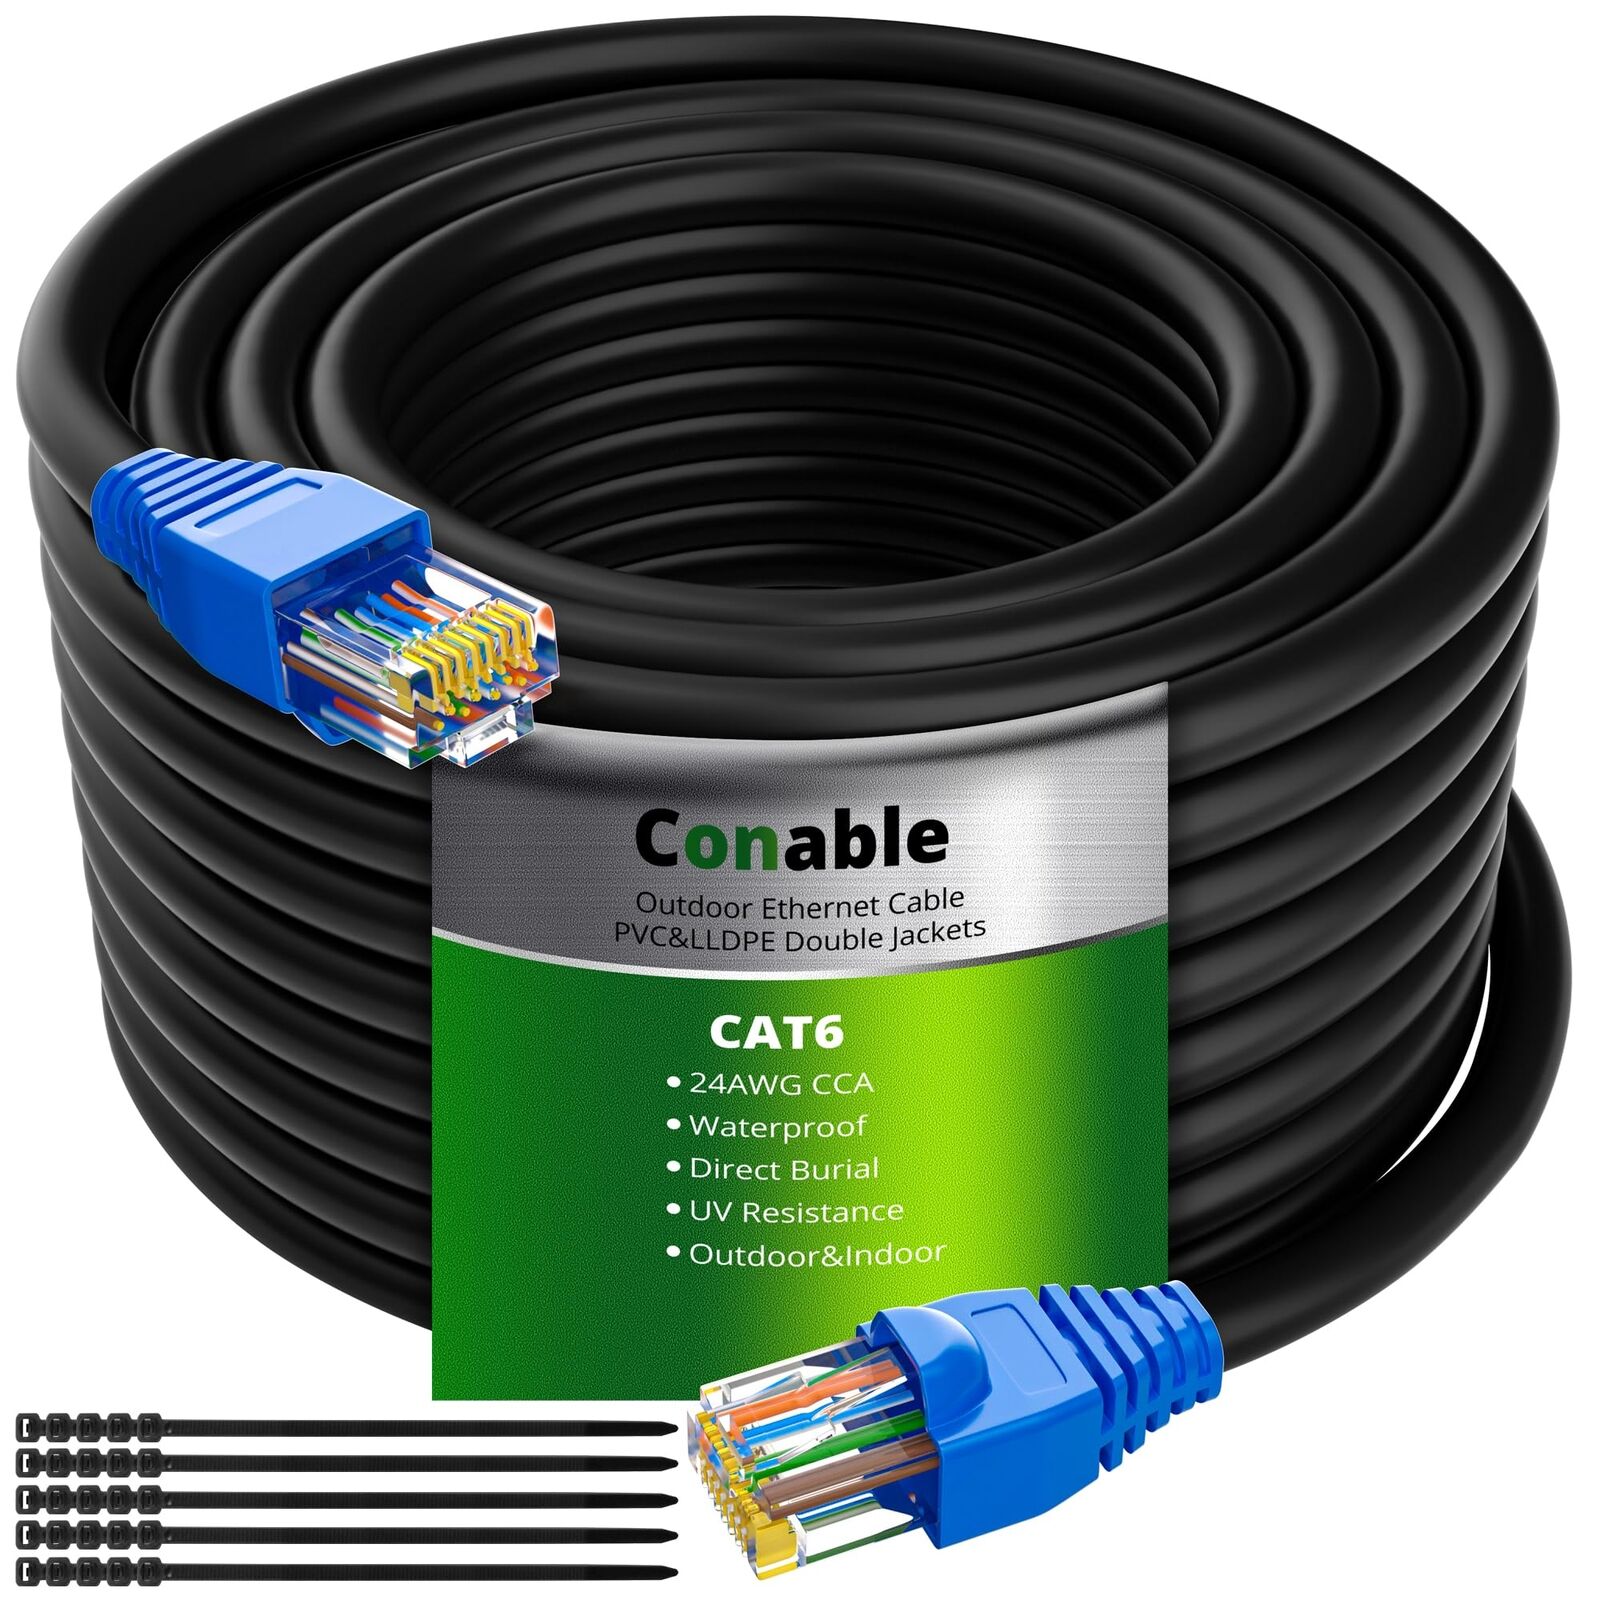 Cat6 Outdoor Ethernet Cable 300ft Heavy Duty Double Jackets Internet Cord Waterp